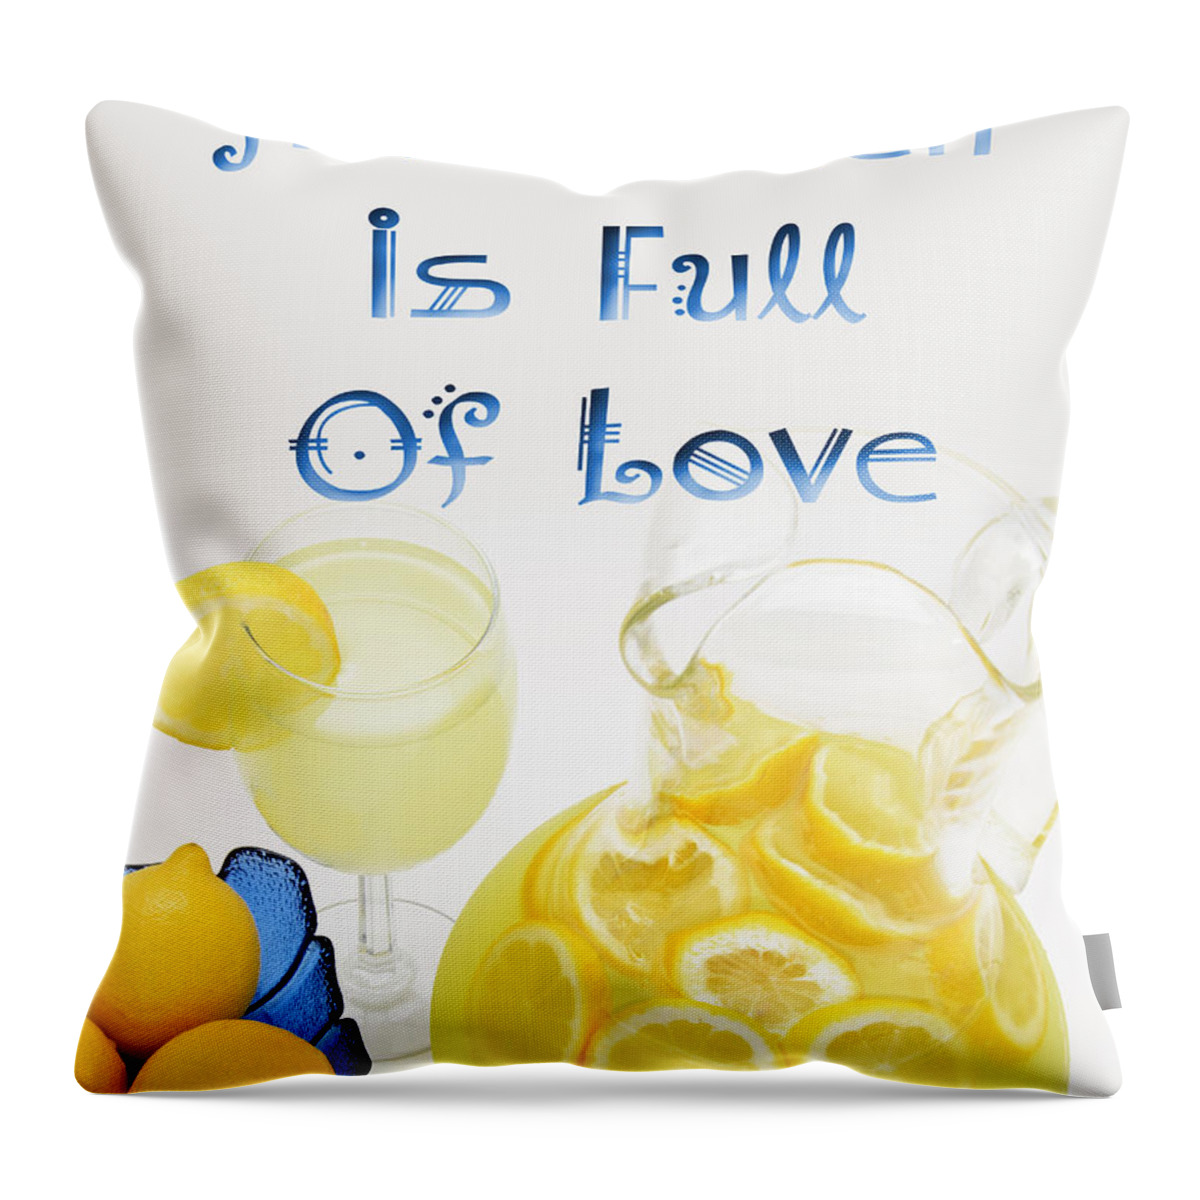 Lemons Throw Pillow featuring the digital art A Kitchen Is Full Of Love 3 by Andee Design